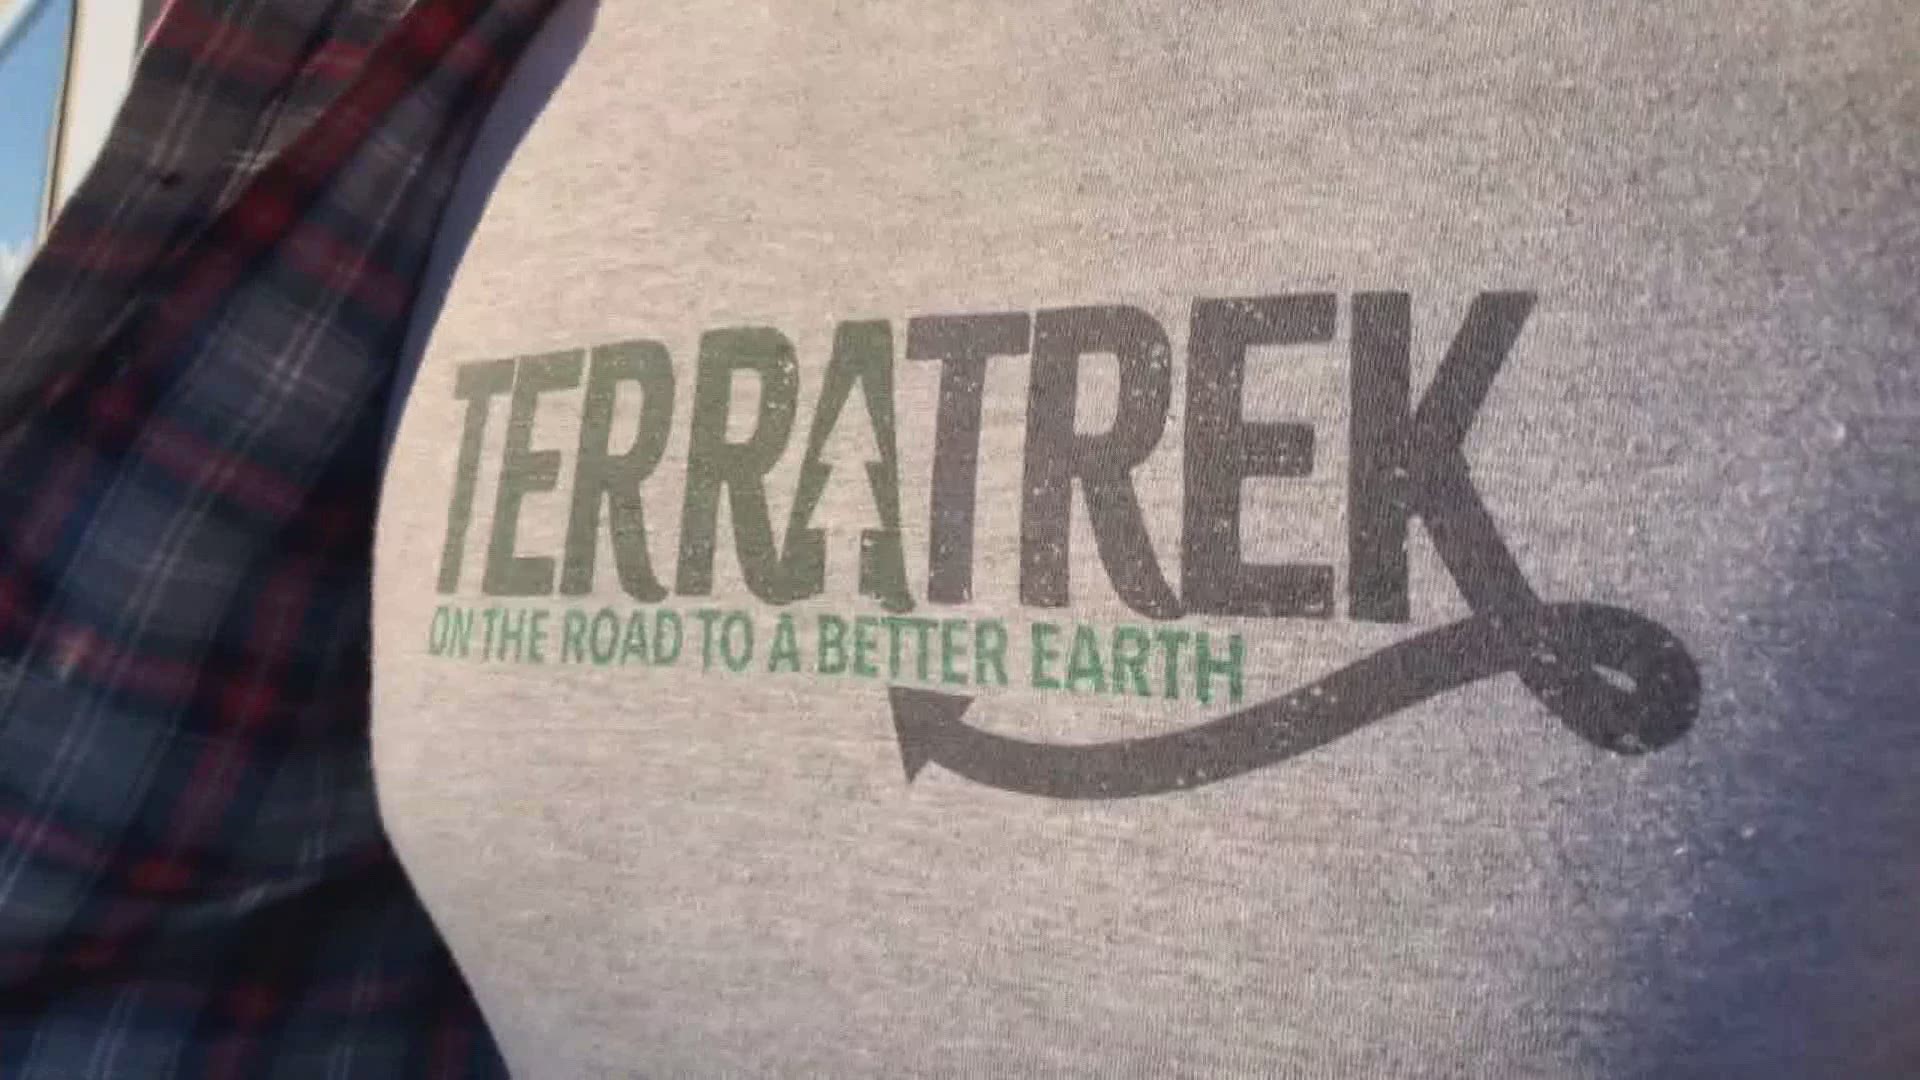 Environmentalist Dave Santillo says in a few years we will all be climate refugees. His group, TerraTrek is touring the U.S. trying to raise awareness.